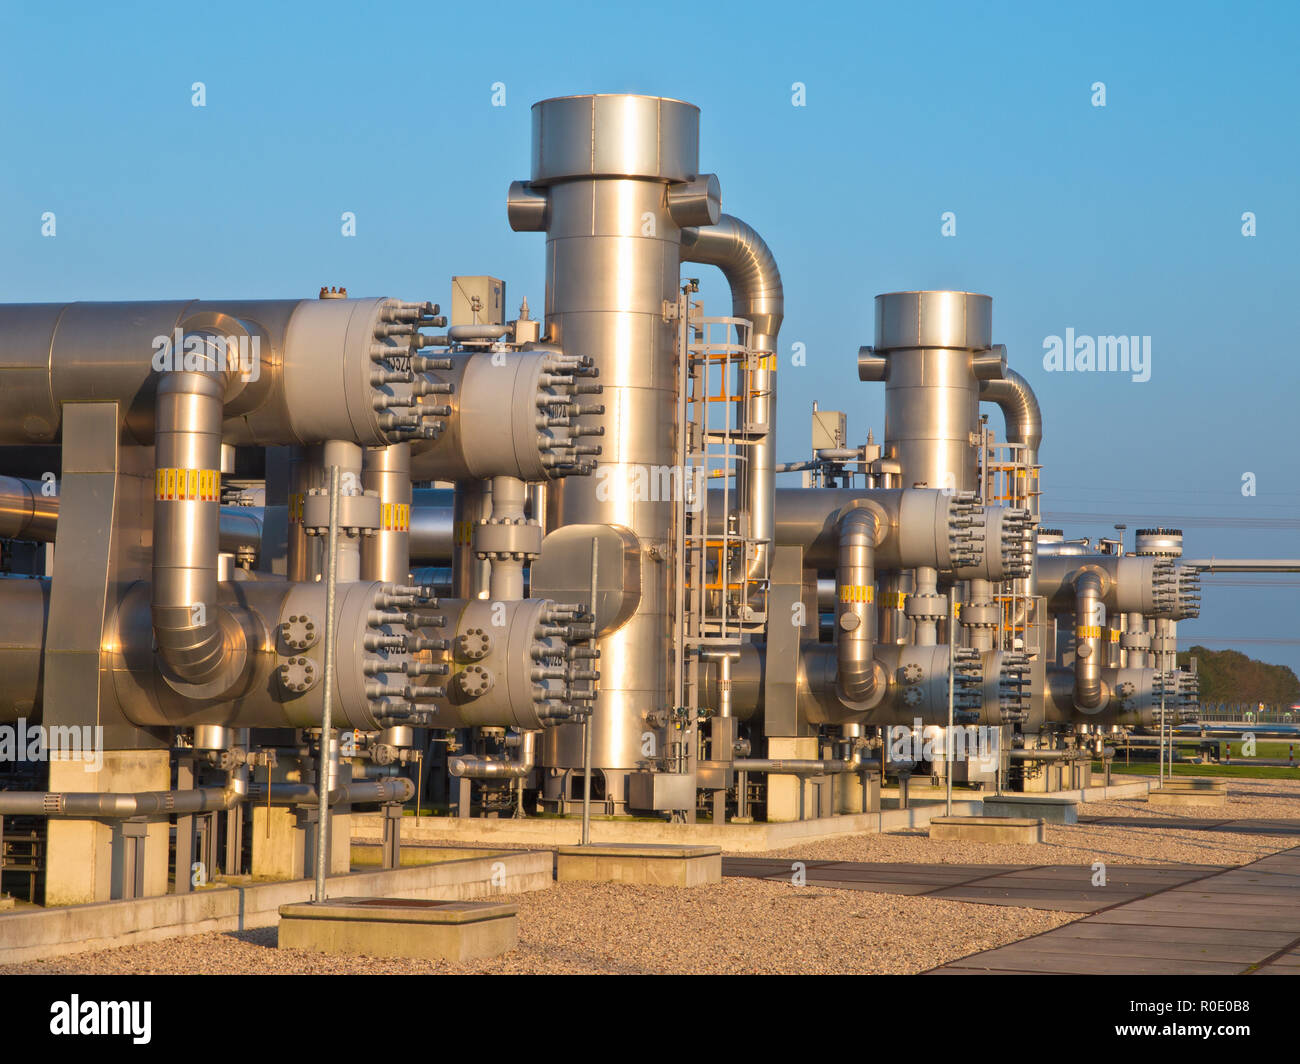 natural gas processing site during sunset Stock Photo